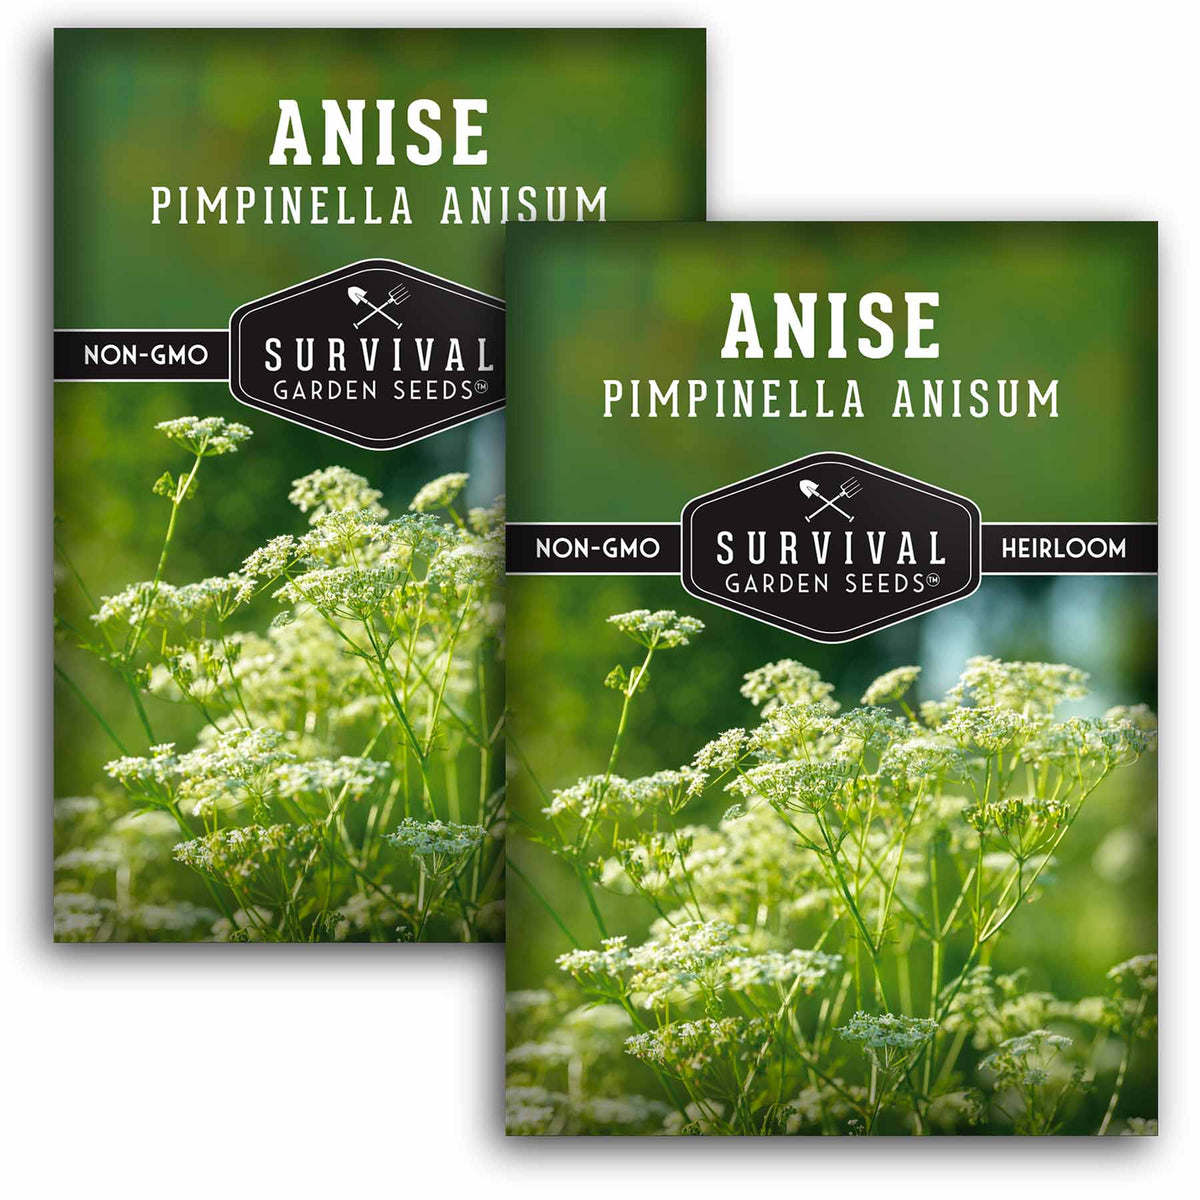 2 packets of Anise seeds